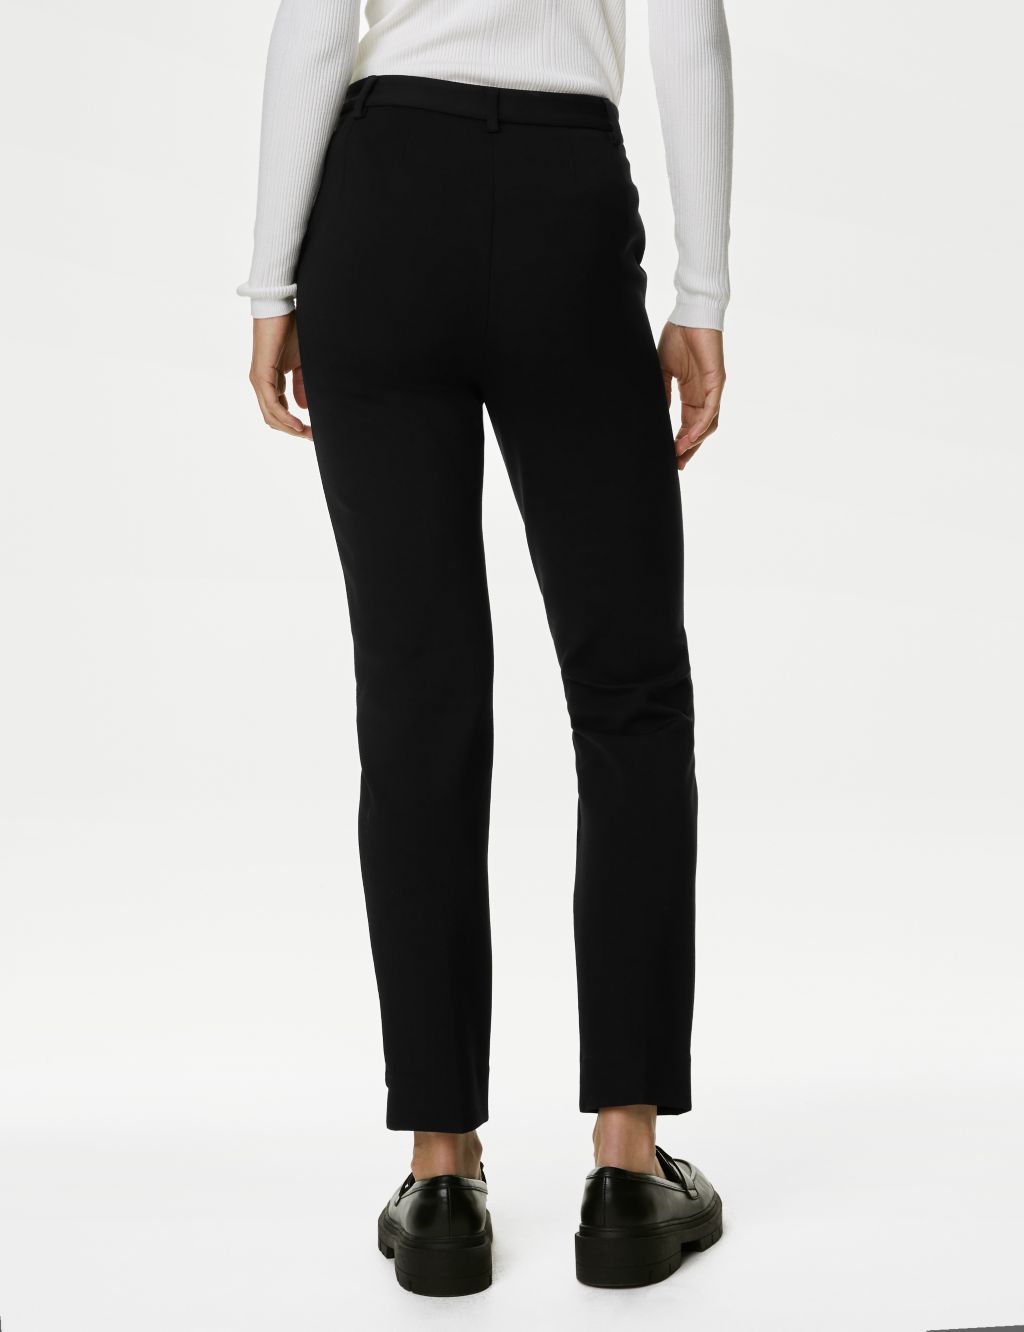 Jersey Slim Fit Ankle Grazer Trousers image 5